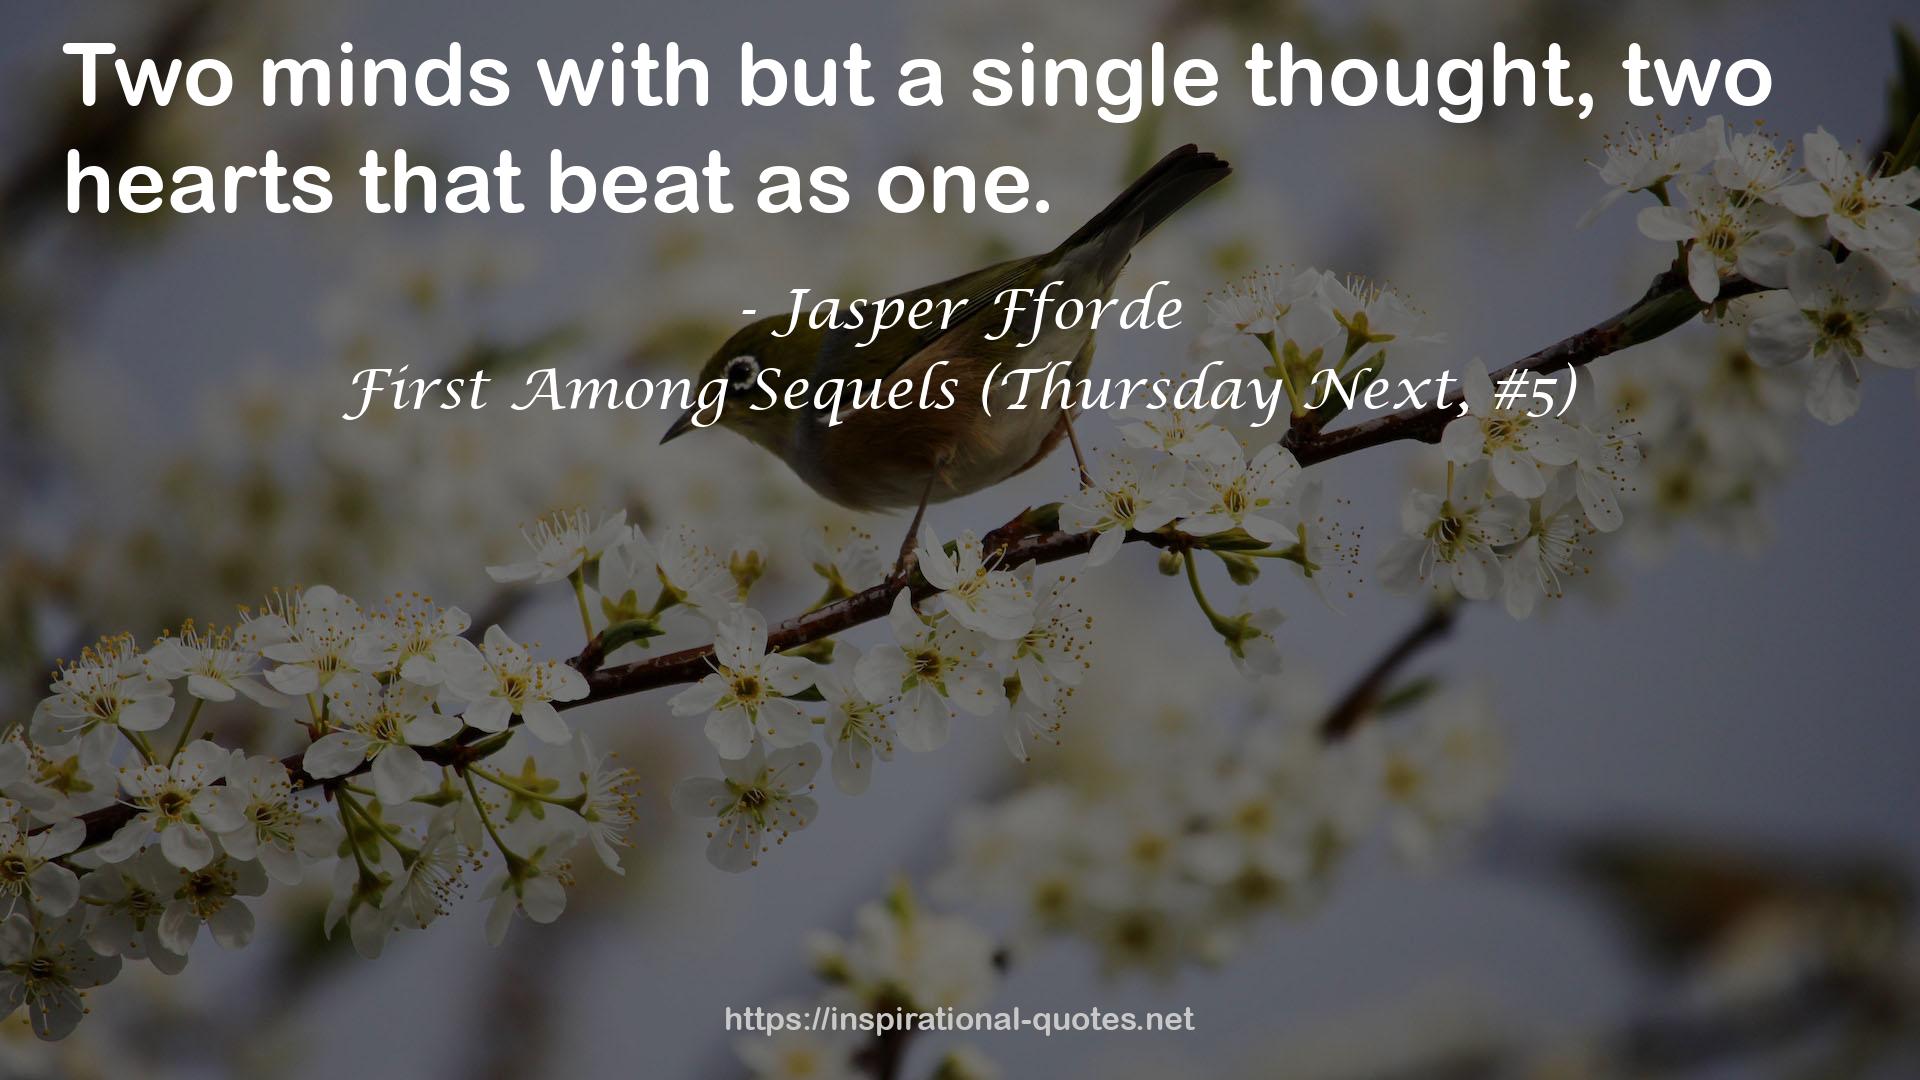 First Among Sequels (Thursday Next, #5) QUOTES